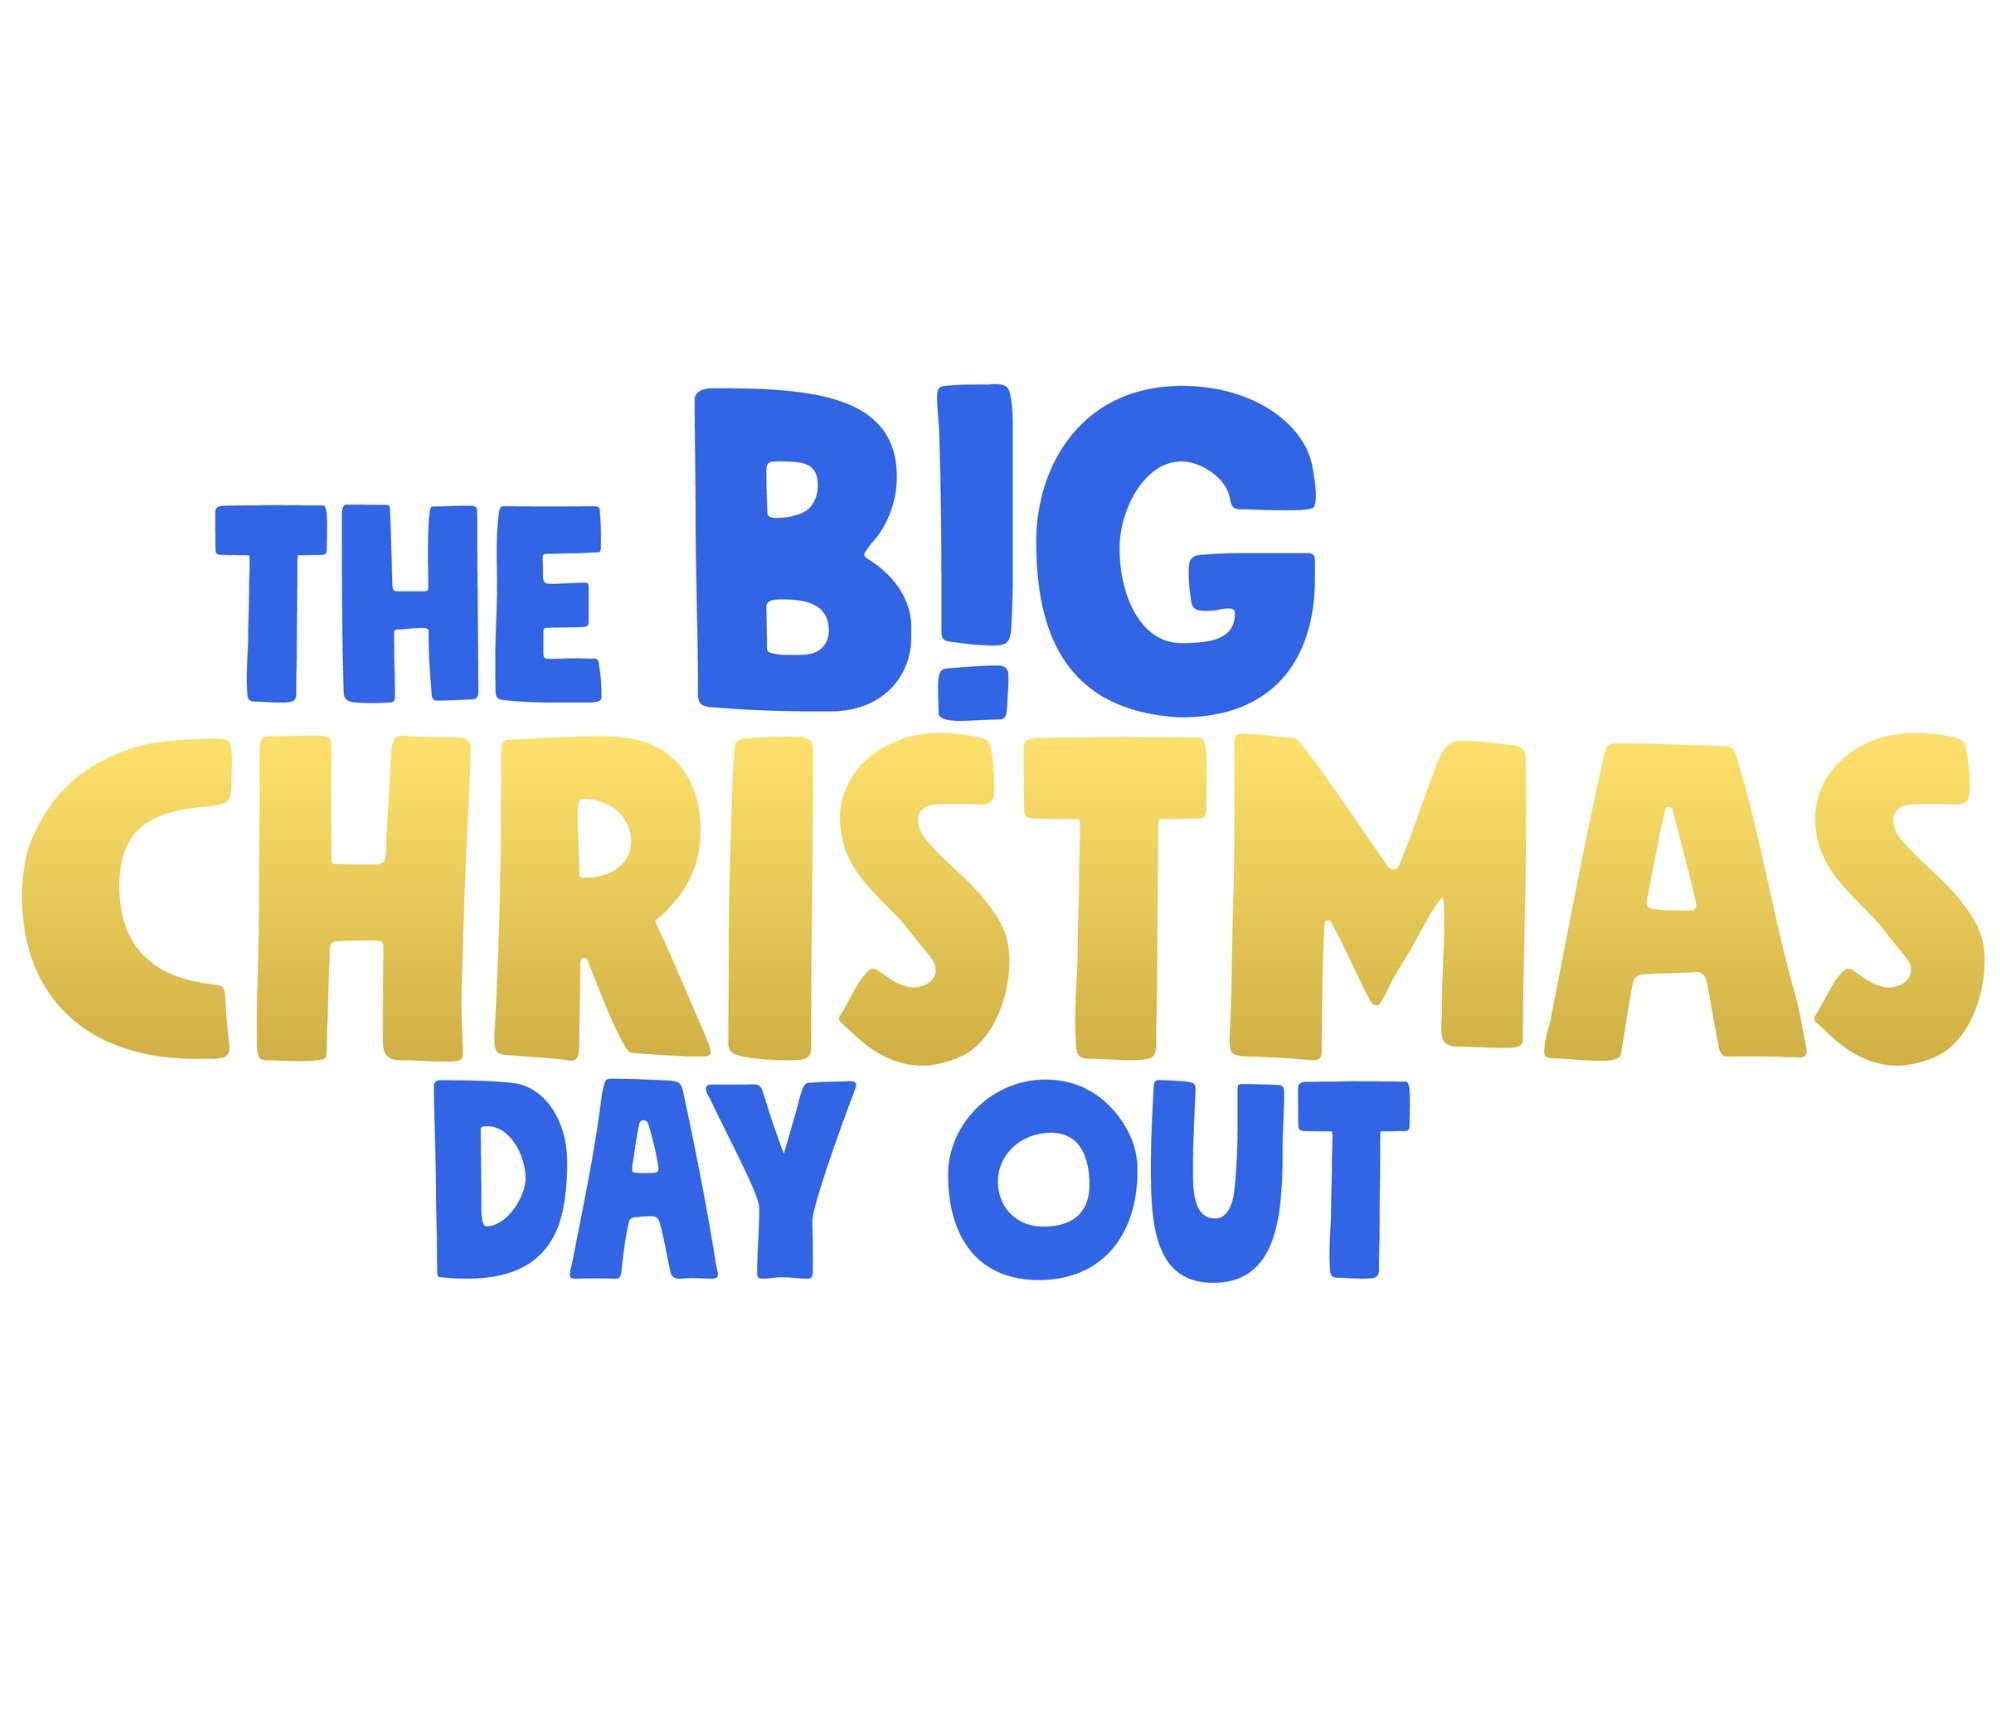 The+Big+Christmas+Day+Out+Skiddle.jpg